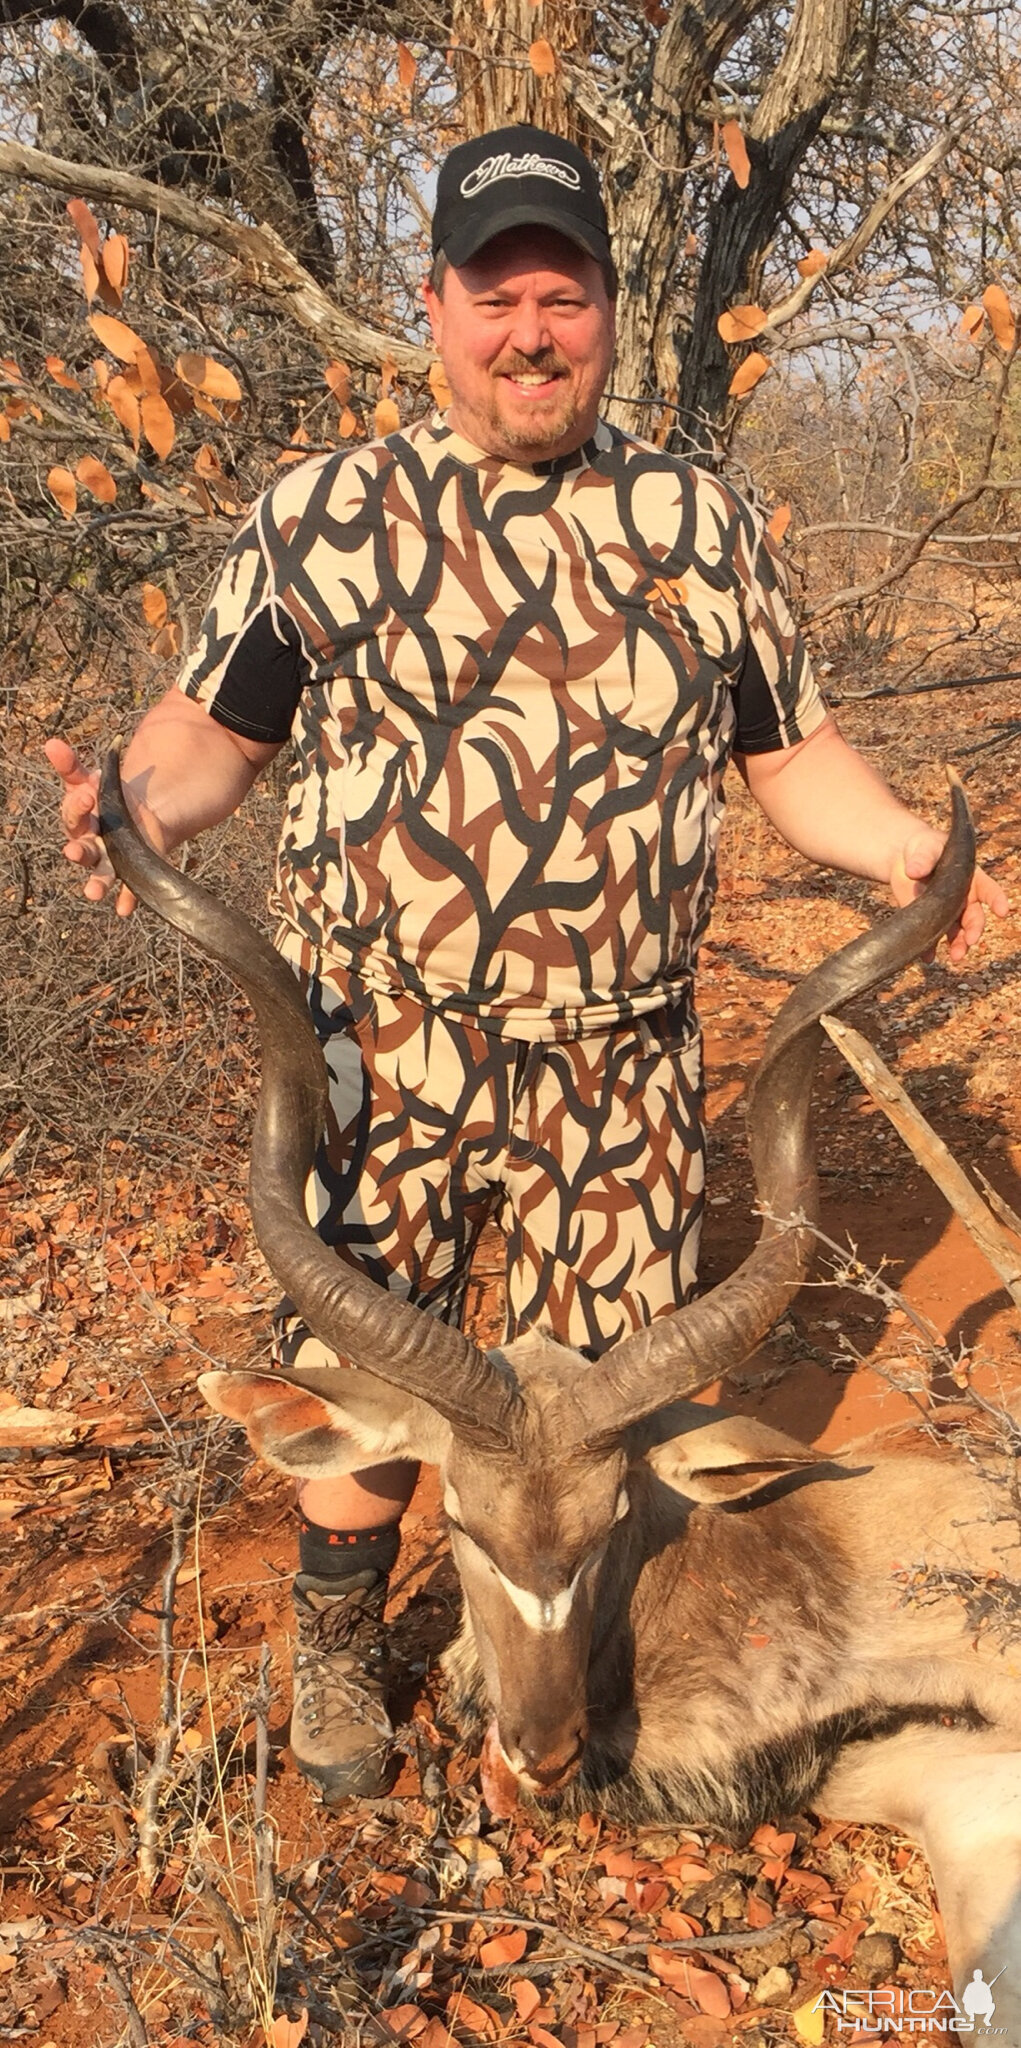 Kudu Bow Hunt South Africa